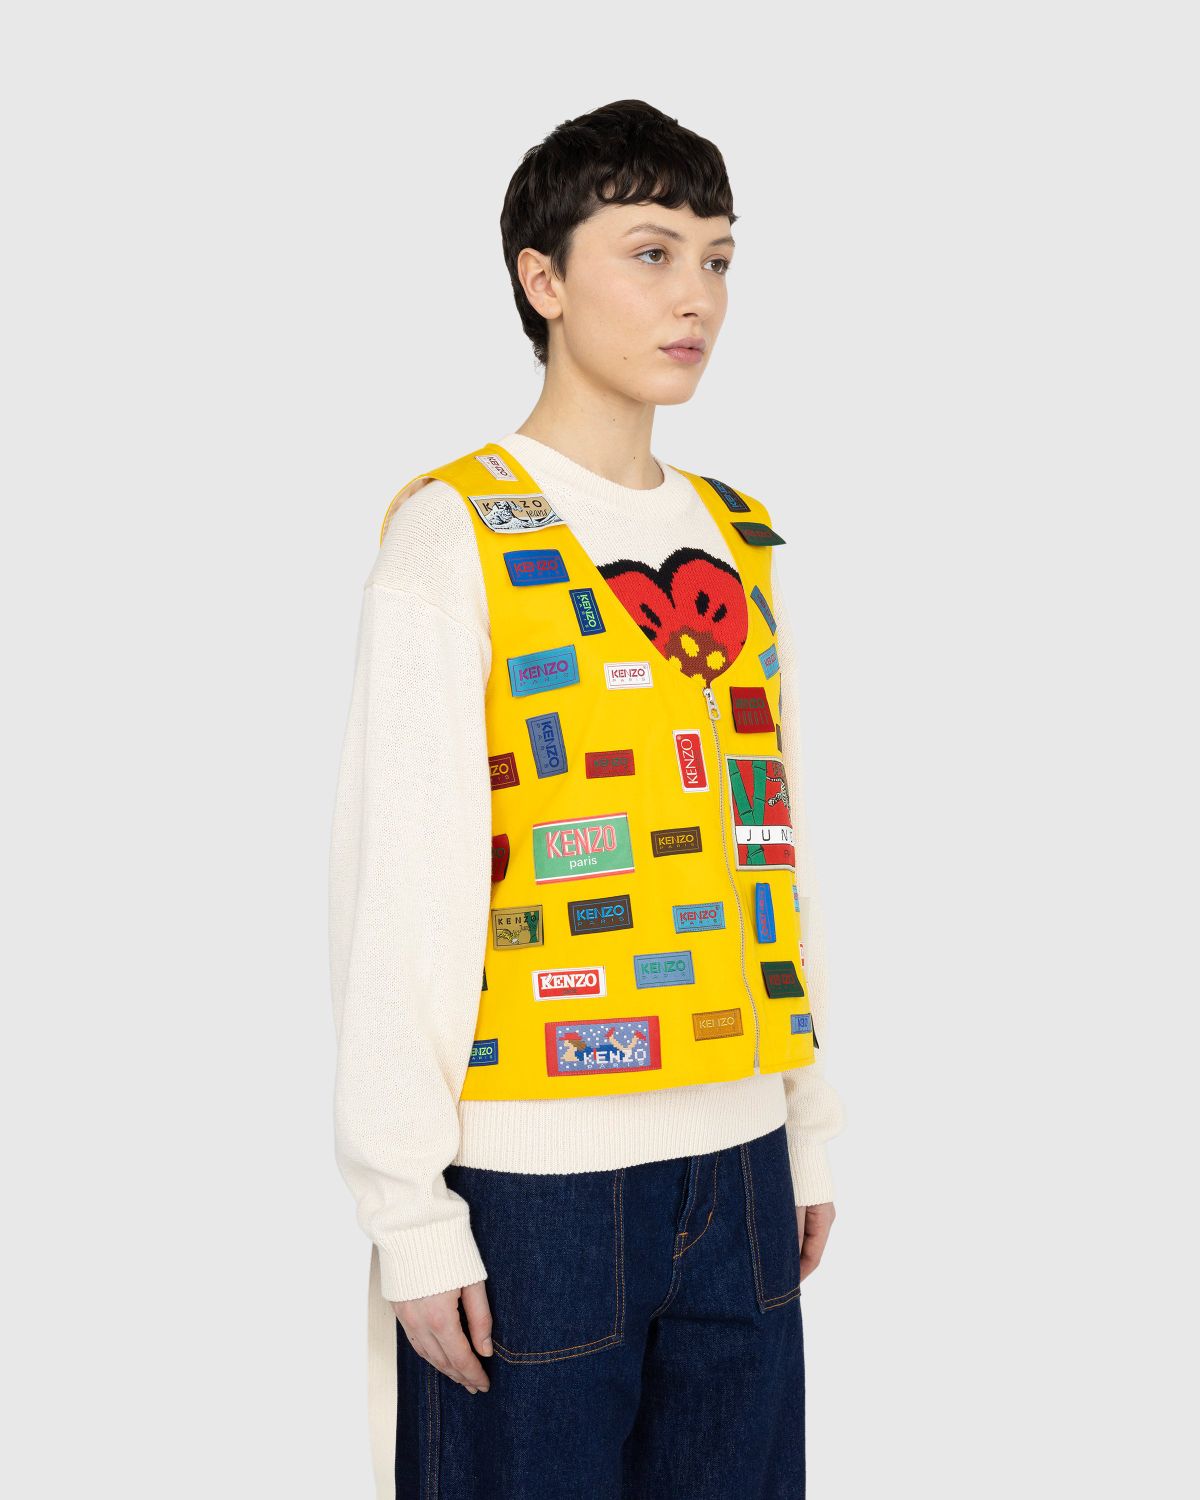 Kenzo – ‘Archives Labels’ Vest - Outerwear - Yellow - Image 2